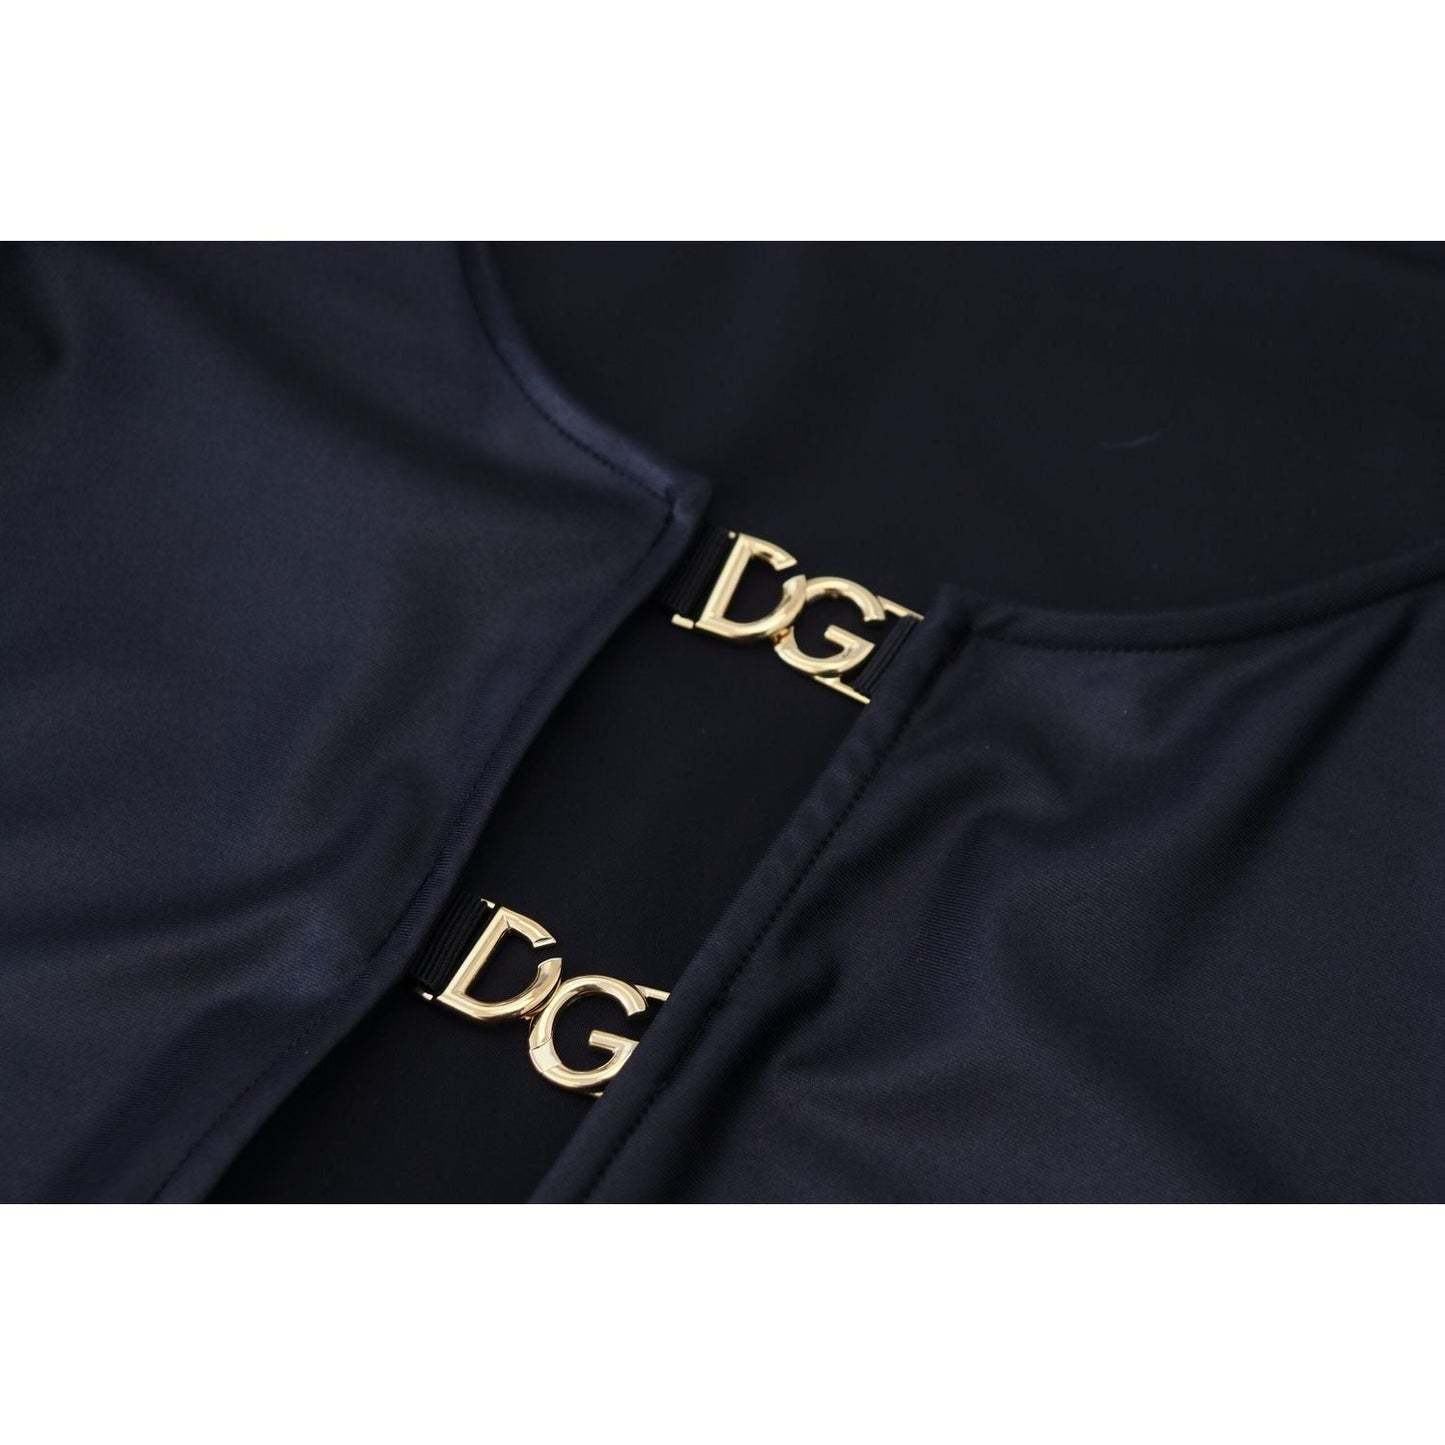 Dolce & Gabbana Elegant Black 3/4 Sleeve Top with Gold Detailing black-cotton-stretch-open-chest-3-4-sleeve-top